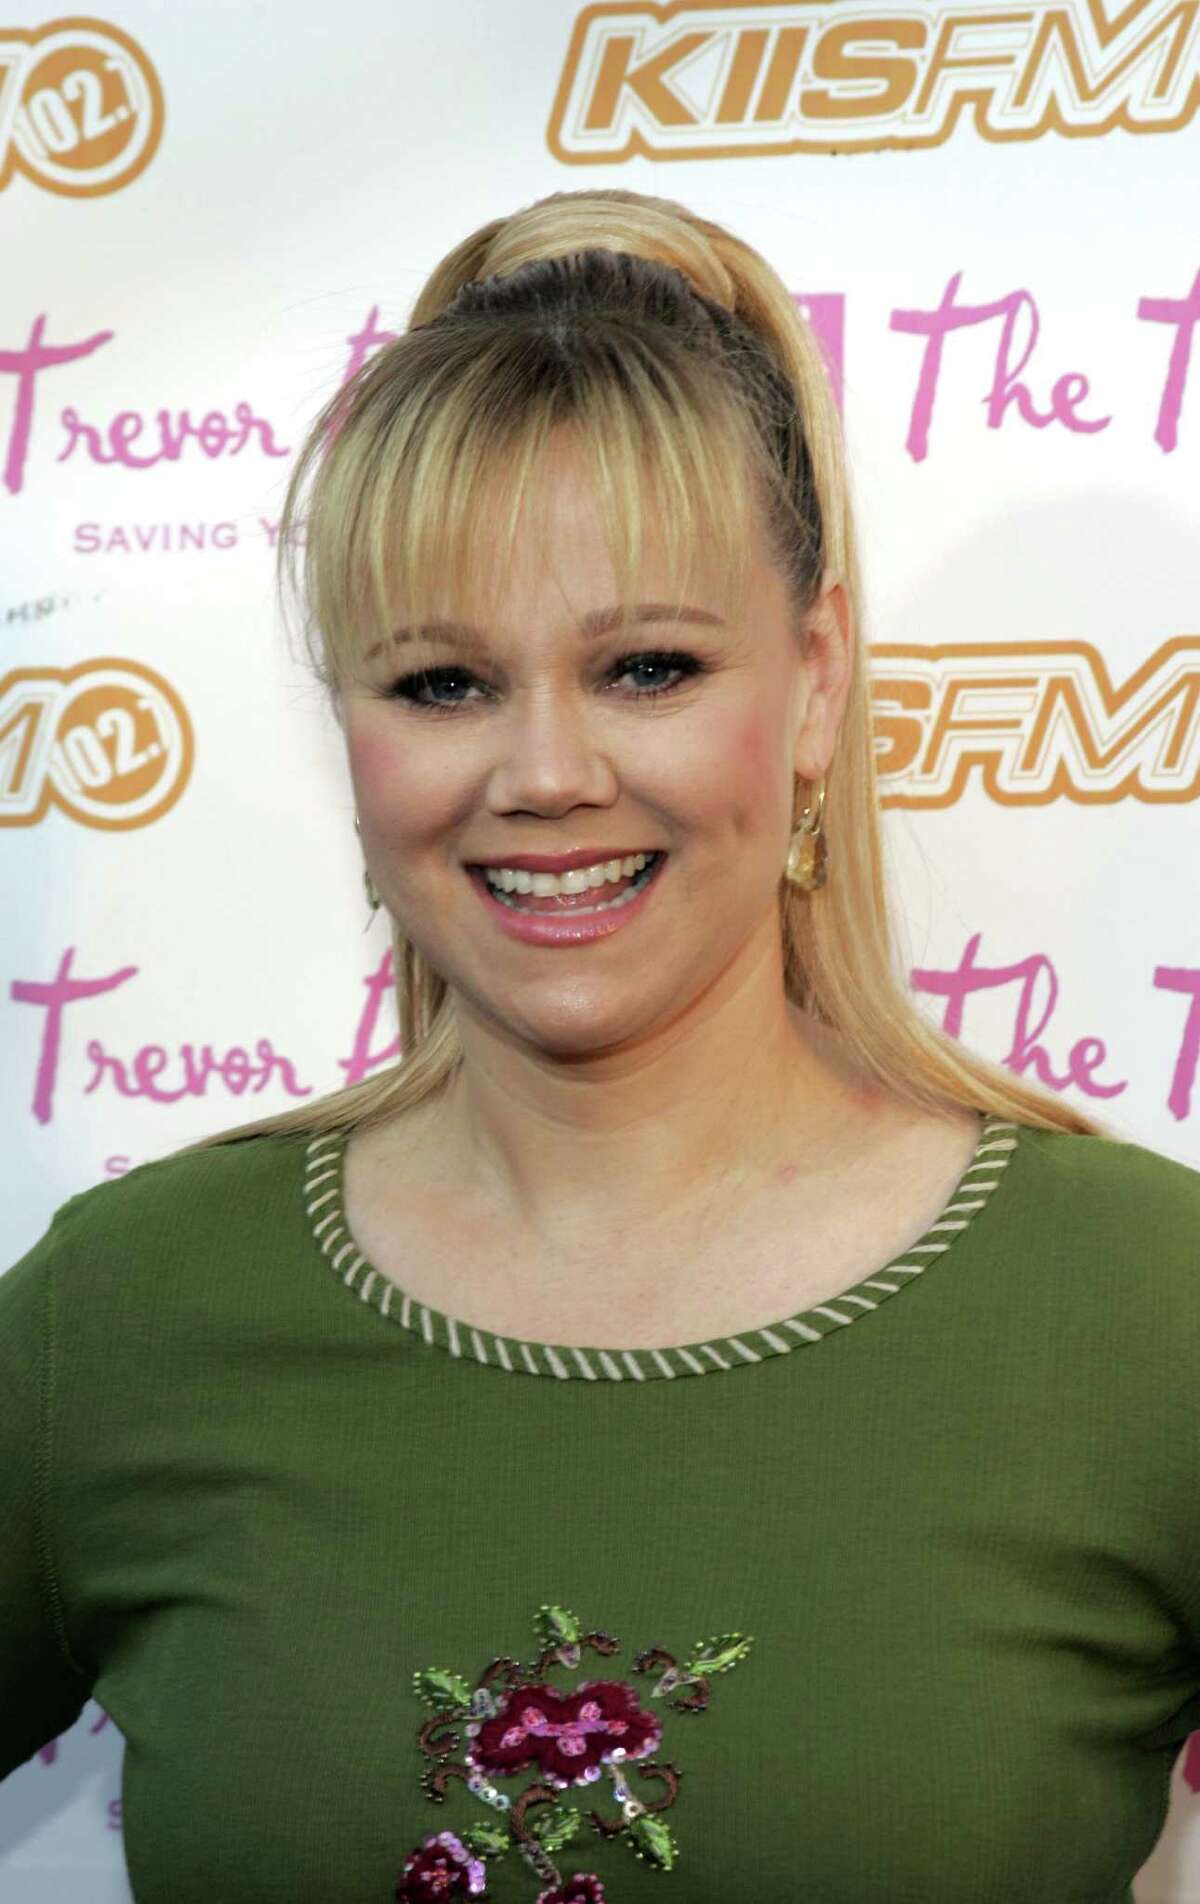 LOS ANGELES - DECEMBER 4: Actress Caroline Rhea arrives for the Cracked Xmas 8 benefitting the Trevor Project at the LG Wiltern on December 4, 2005 in Los Angeles, California. (Photo by Michael Buckner/Getty Images) *** Local Caption *** Caroline Rhea